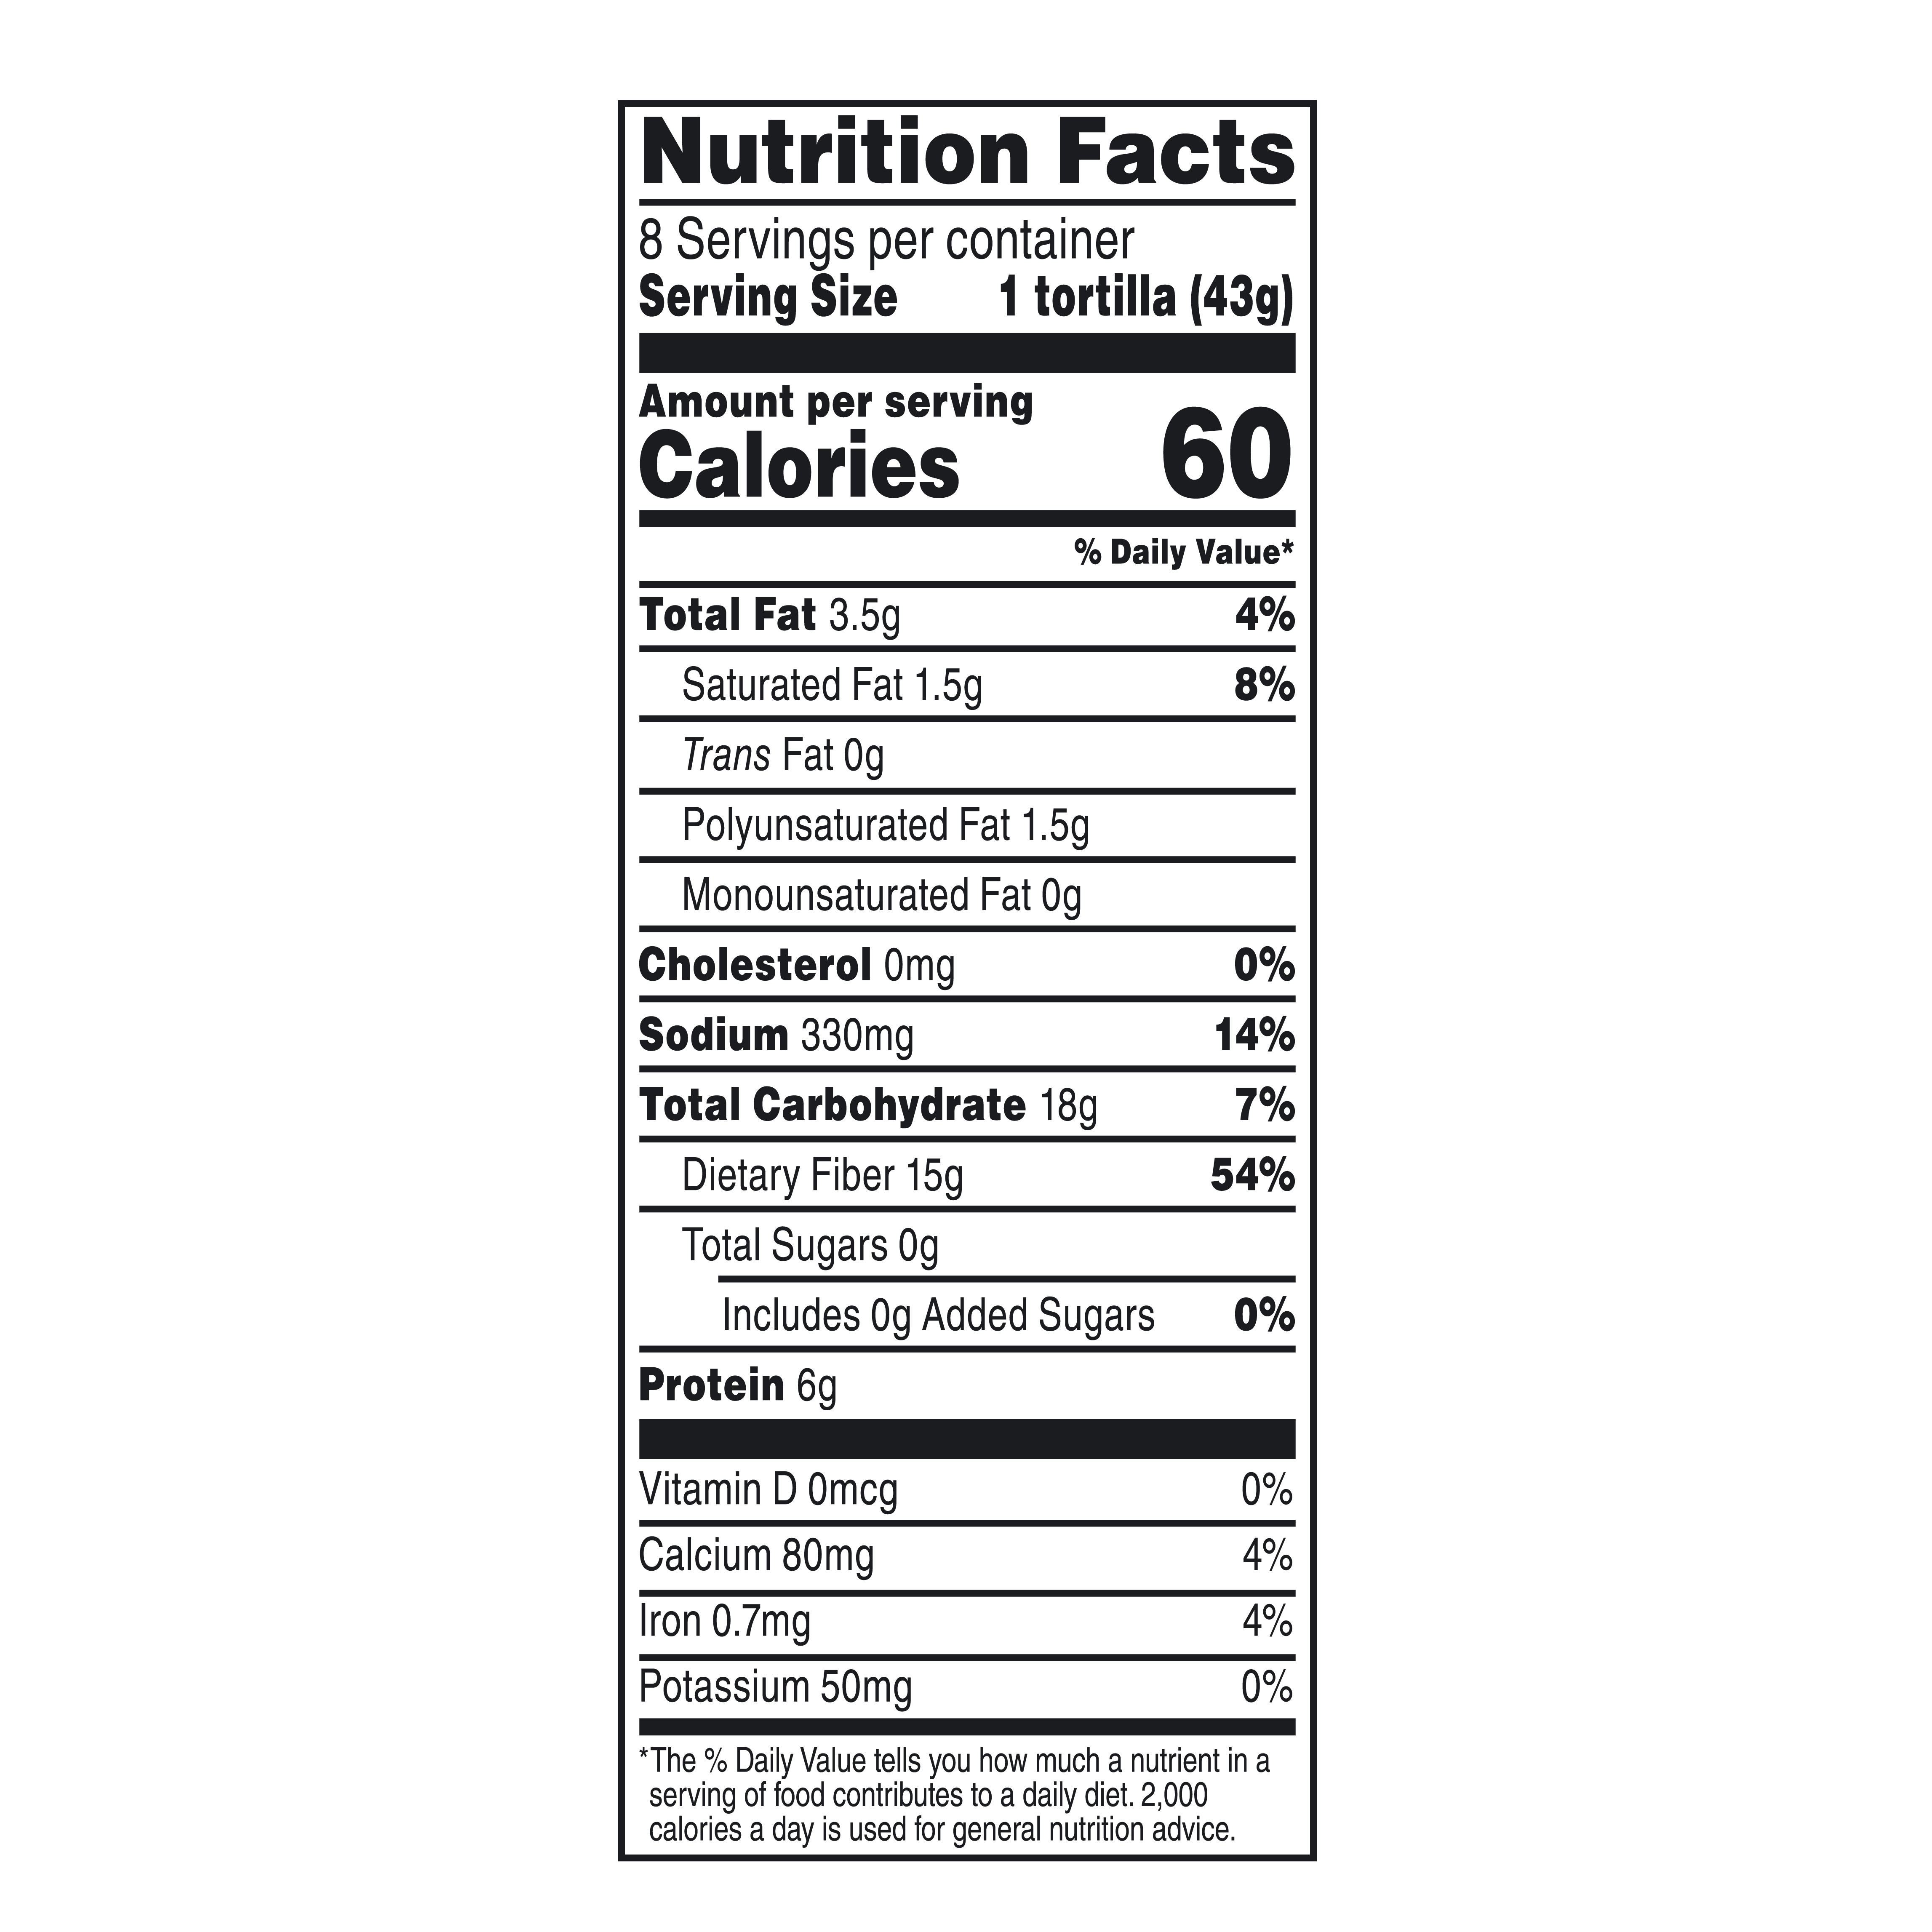 Carb Balance Spinach Wraps nutrition facts